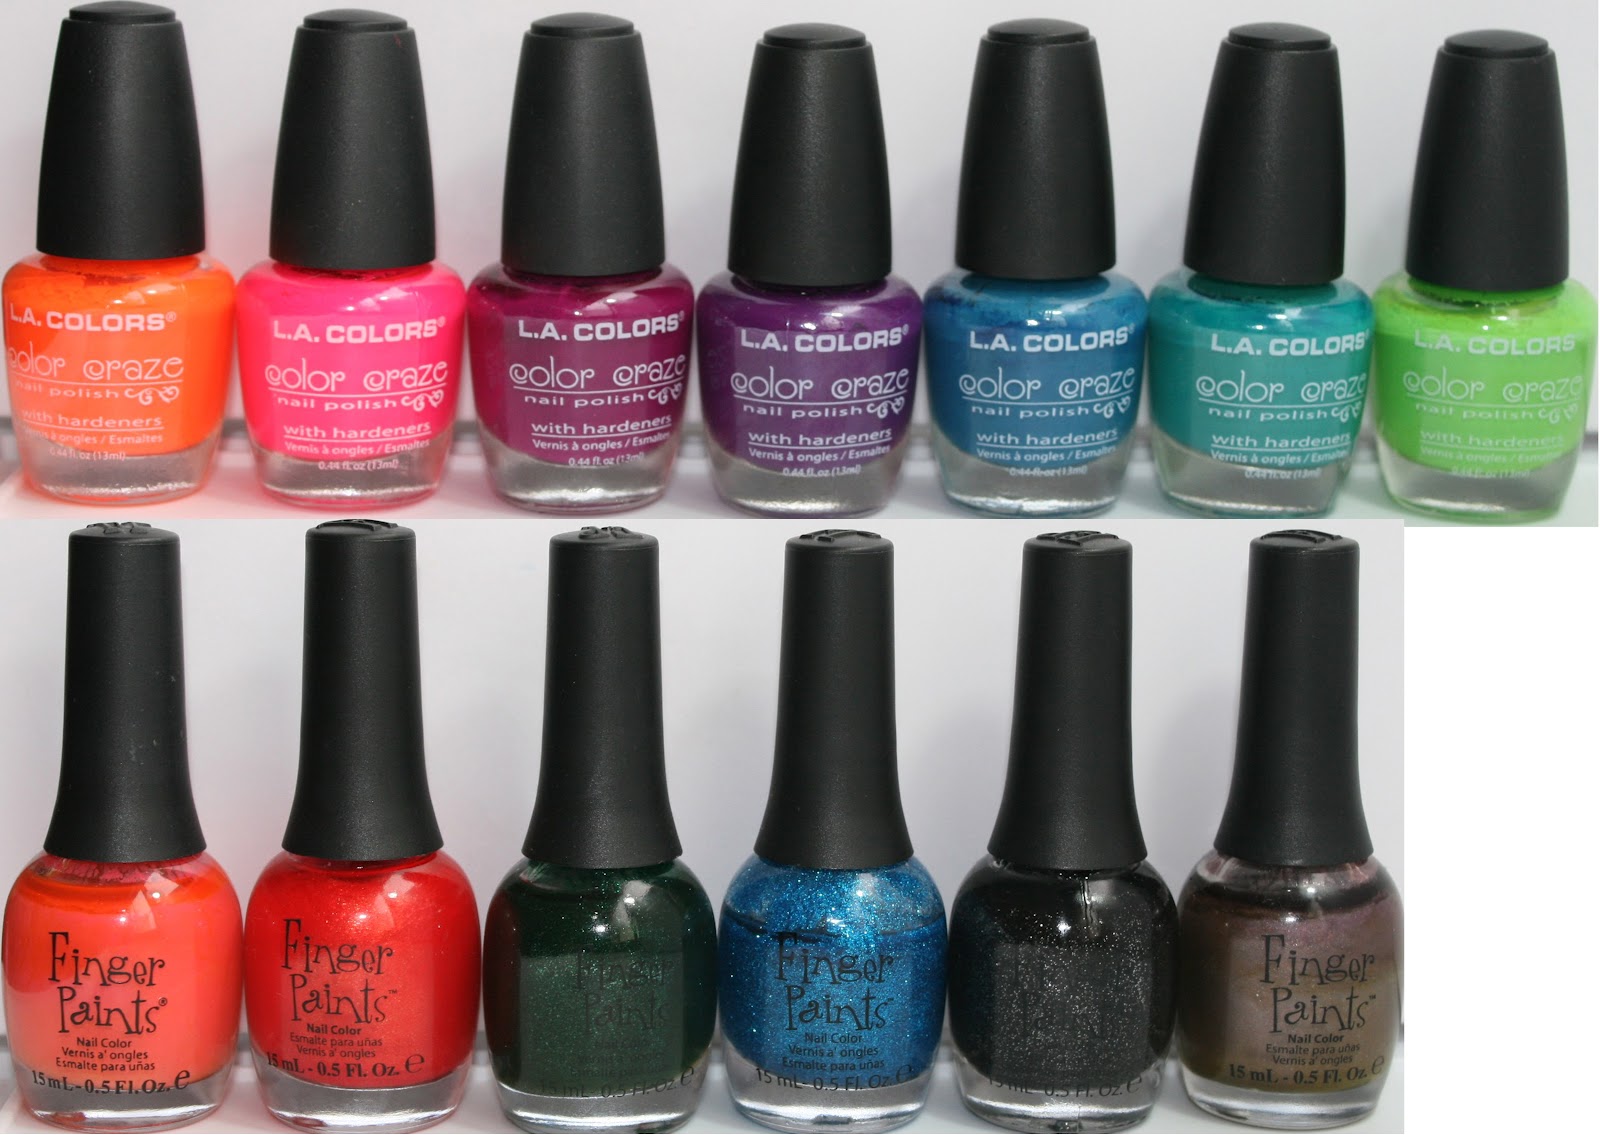 L.A. Colors Nail Frill Kit - wide 5